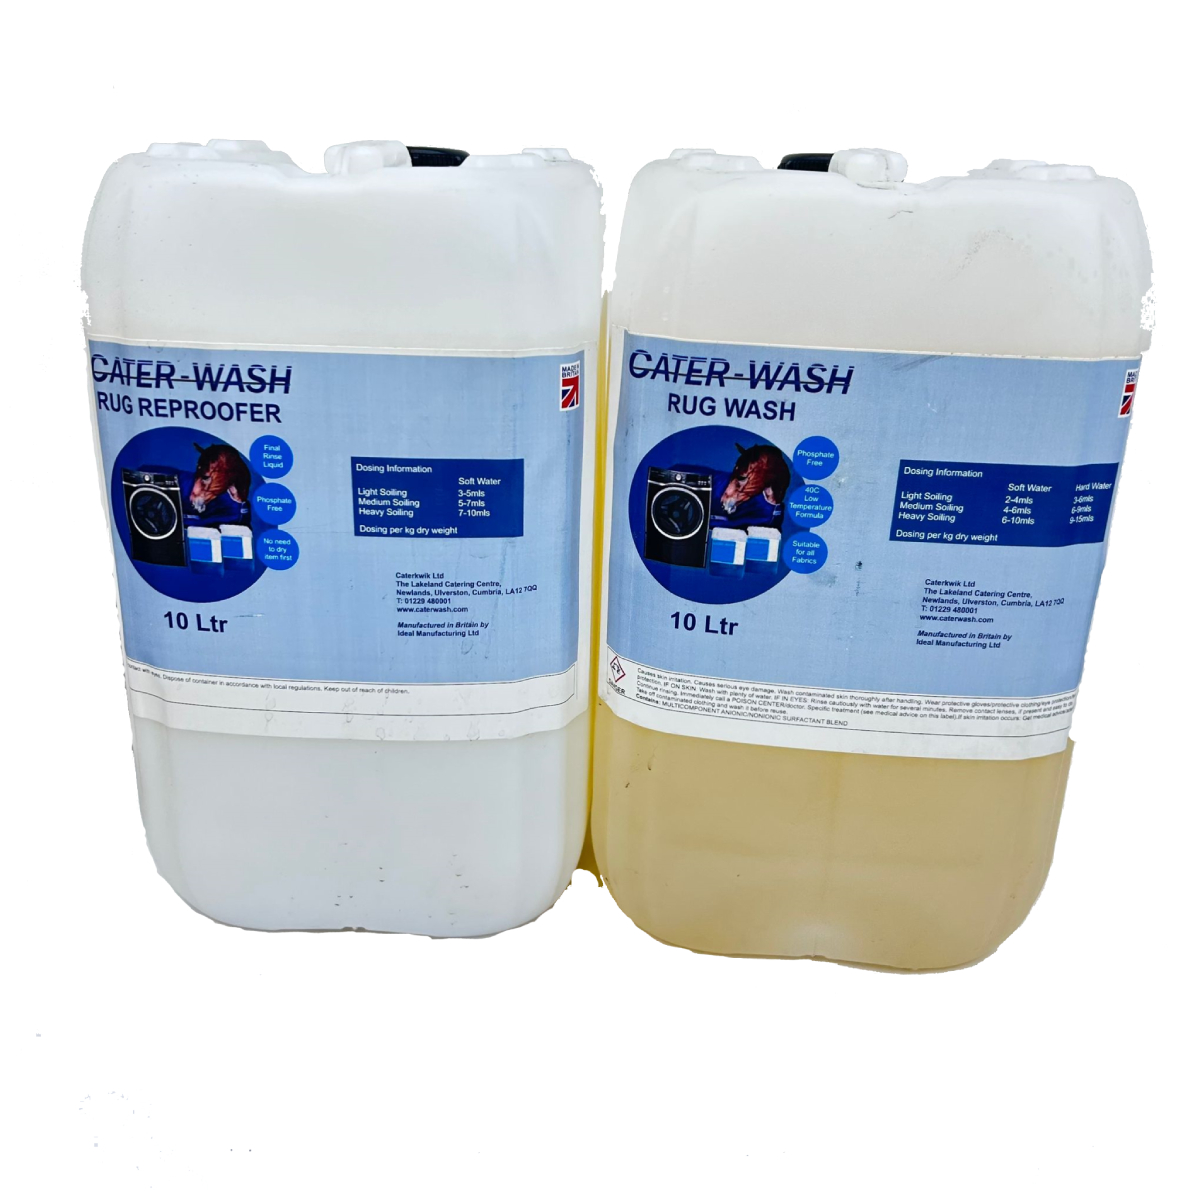 Cater-Wash Rug Wash & Reproof Package Deal - CK7007 and CK7468